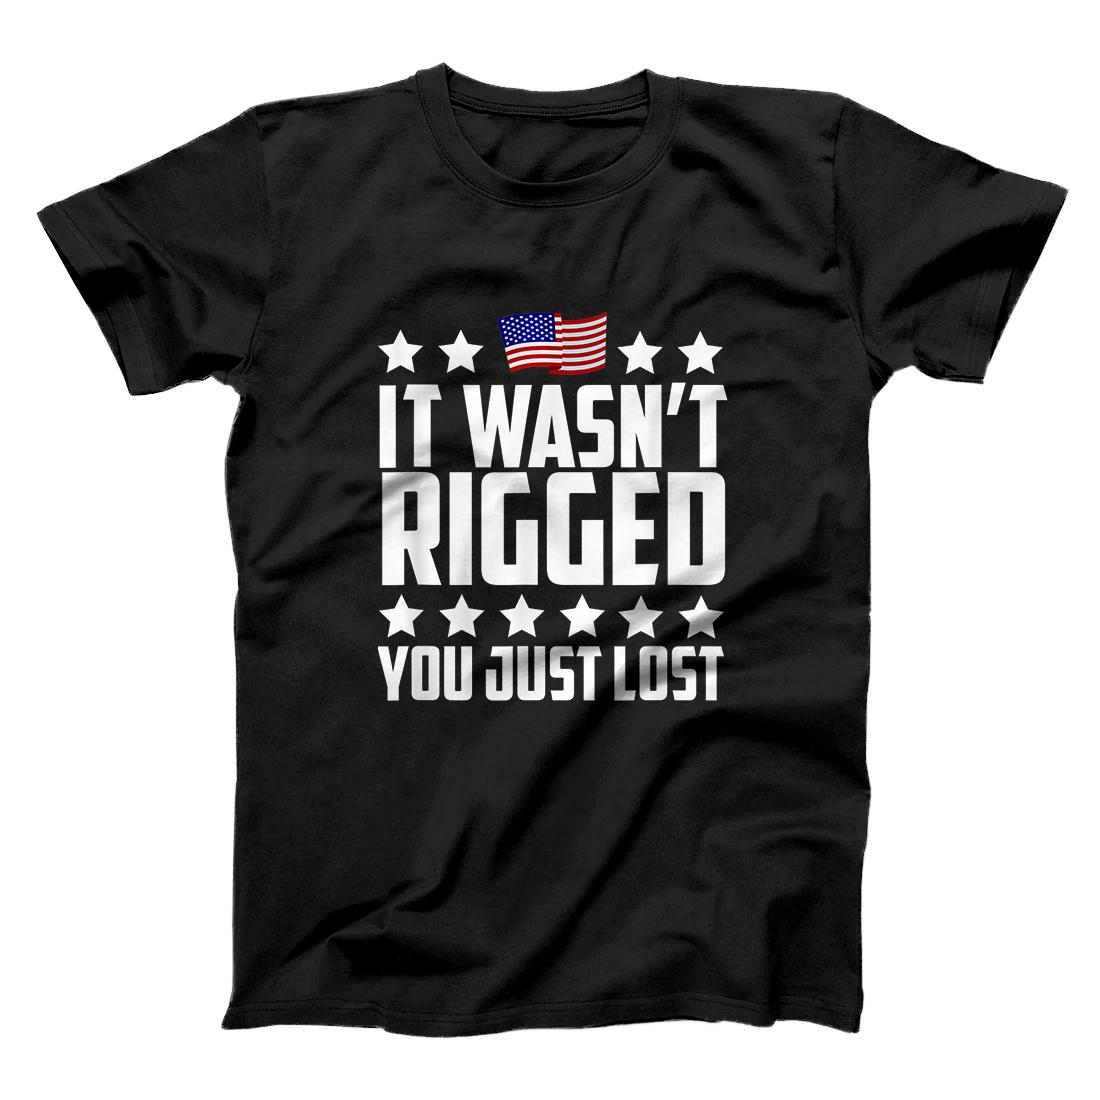 Personalized 2020 Election It Wasn't Rigged You Just Lost Funny Trump T-Shirt